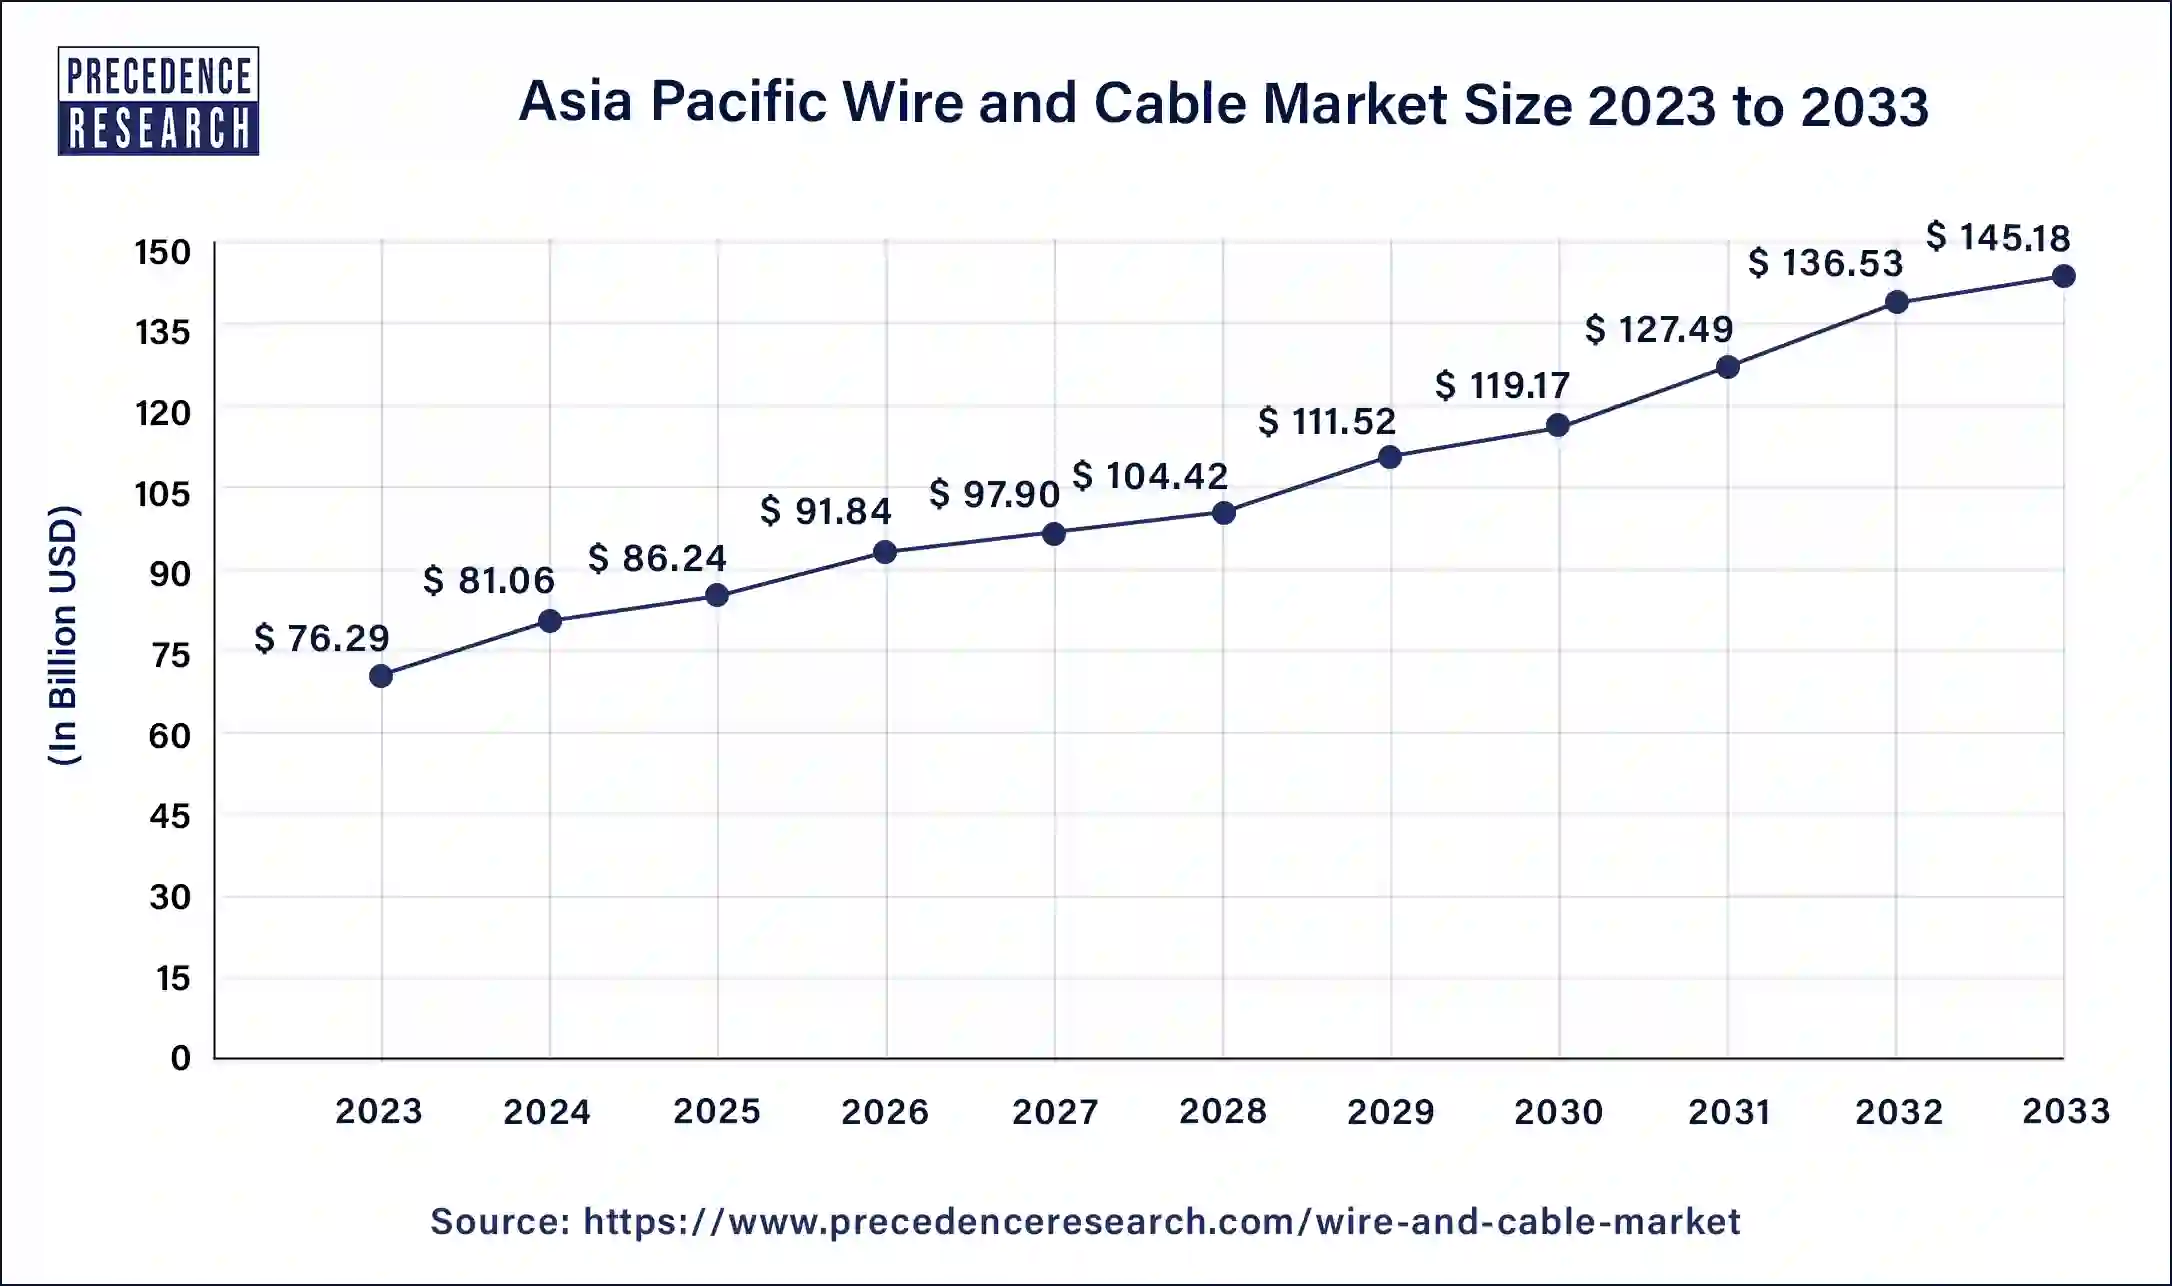 Asia Pacific Wire and Cable Market Size 2024 to 2033